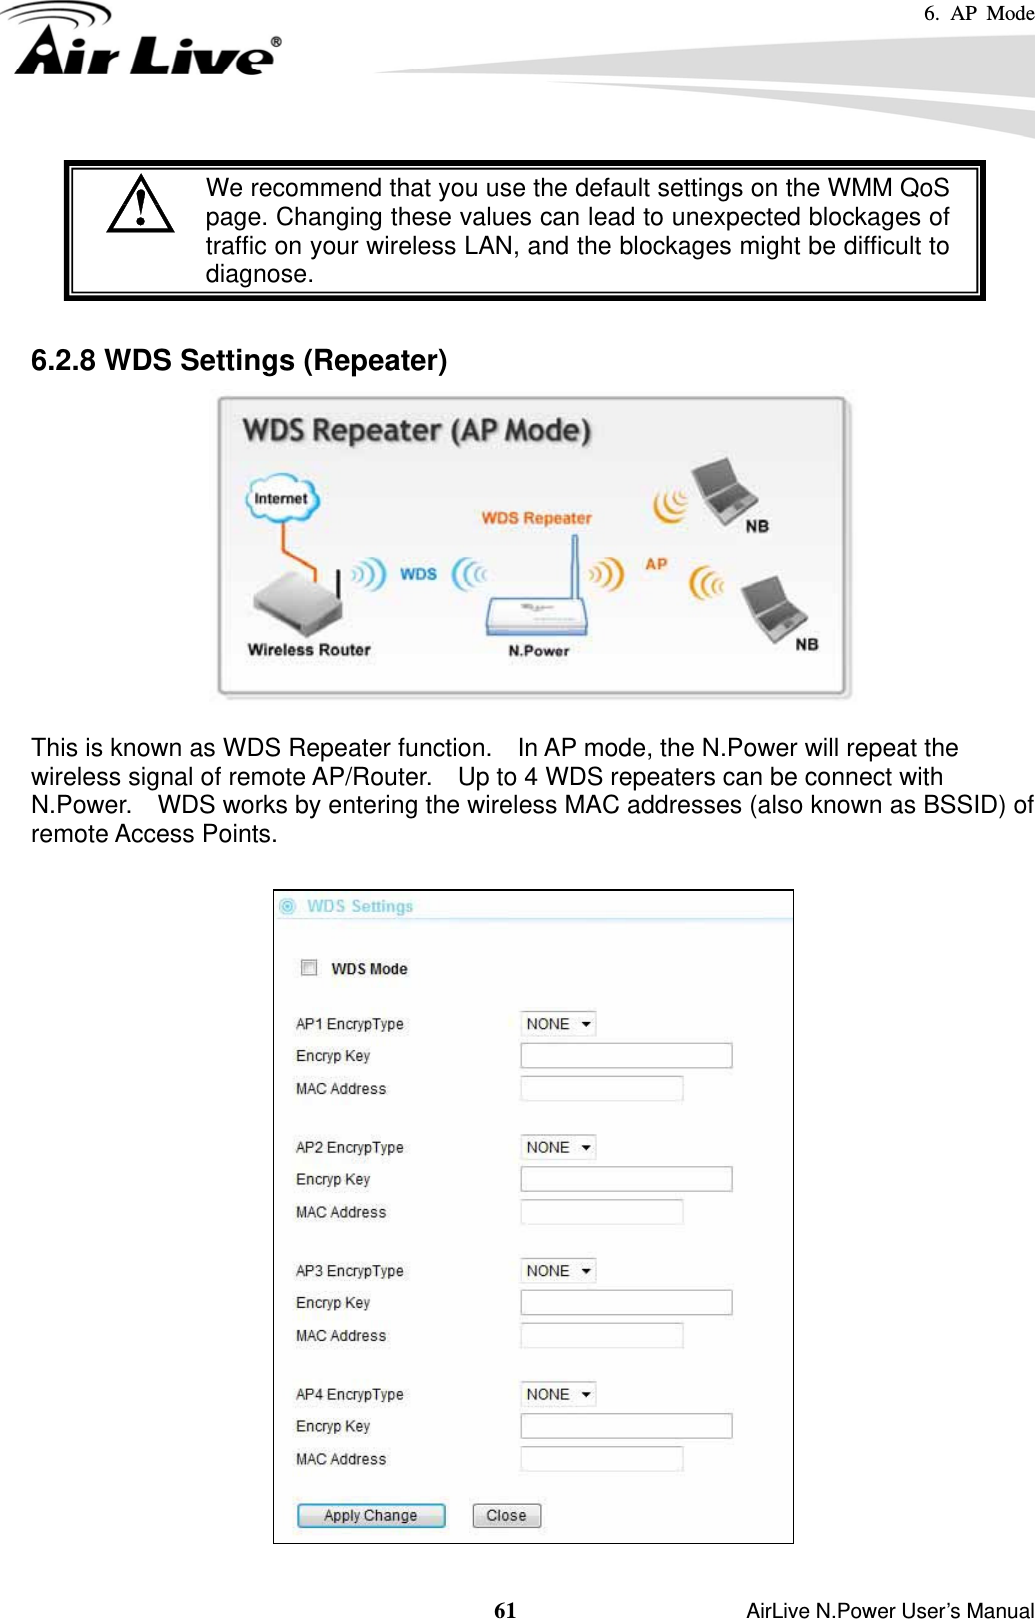 6. AP Mode  61                    AirLive N.Power User’s Manual  We recommend that you use the default settings on the WMM QoS page. Changing these values can lead to unexpected blockages oftraffic on your wireless LAN, and the blockages might be difficult todiagnose.   6.2.8 WDS Settings (Repeater)     This is known as WDS Repeater function.    In AP mode, the N.Power will repeat the wireless signal of remote AP/Router.    Up to 4 WDS repeaters can be connect with N.Power.    WDS works by entering the wireless MAC addresses (also known as BSSID) of remote Access Points.     